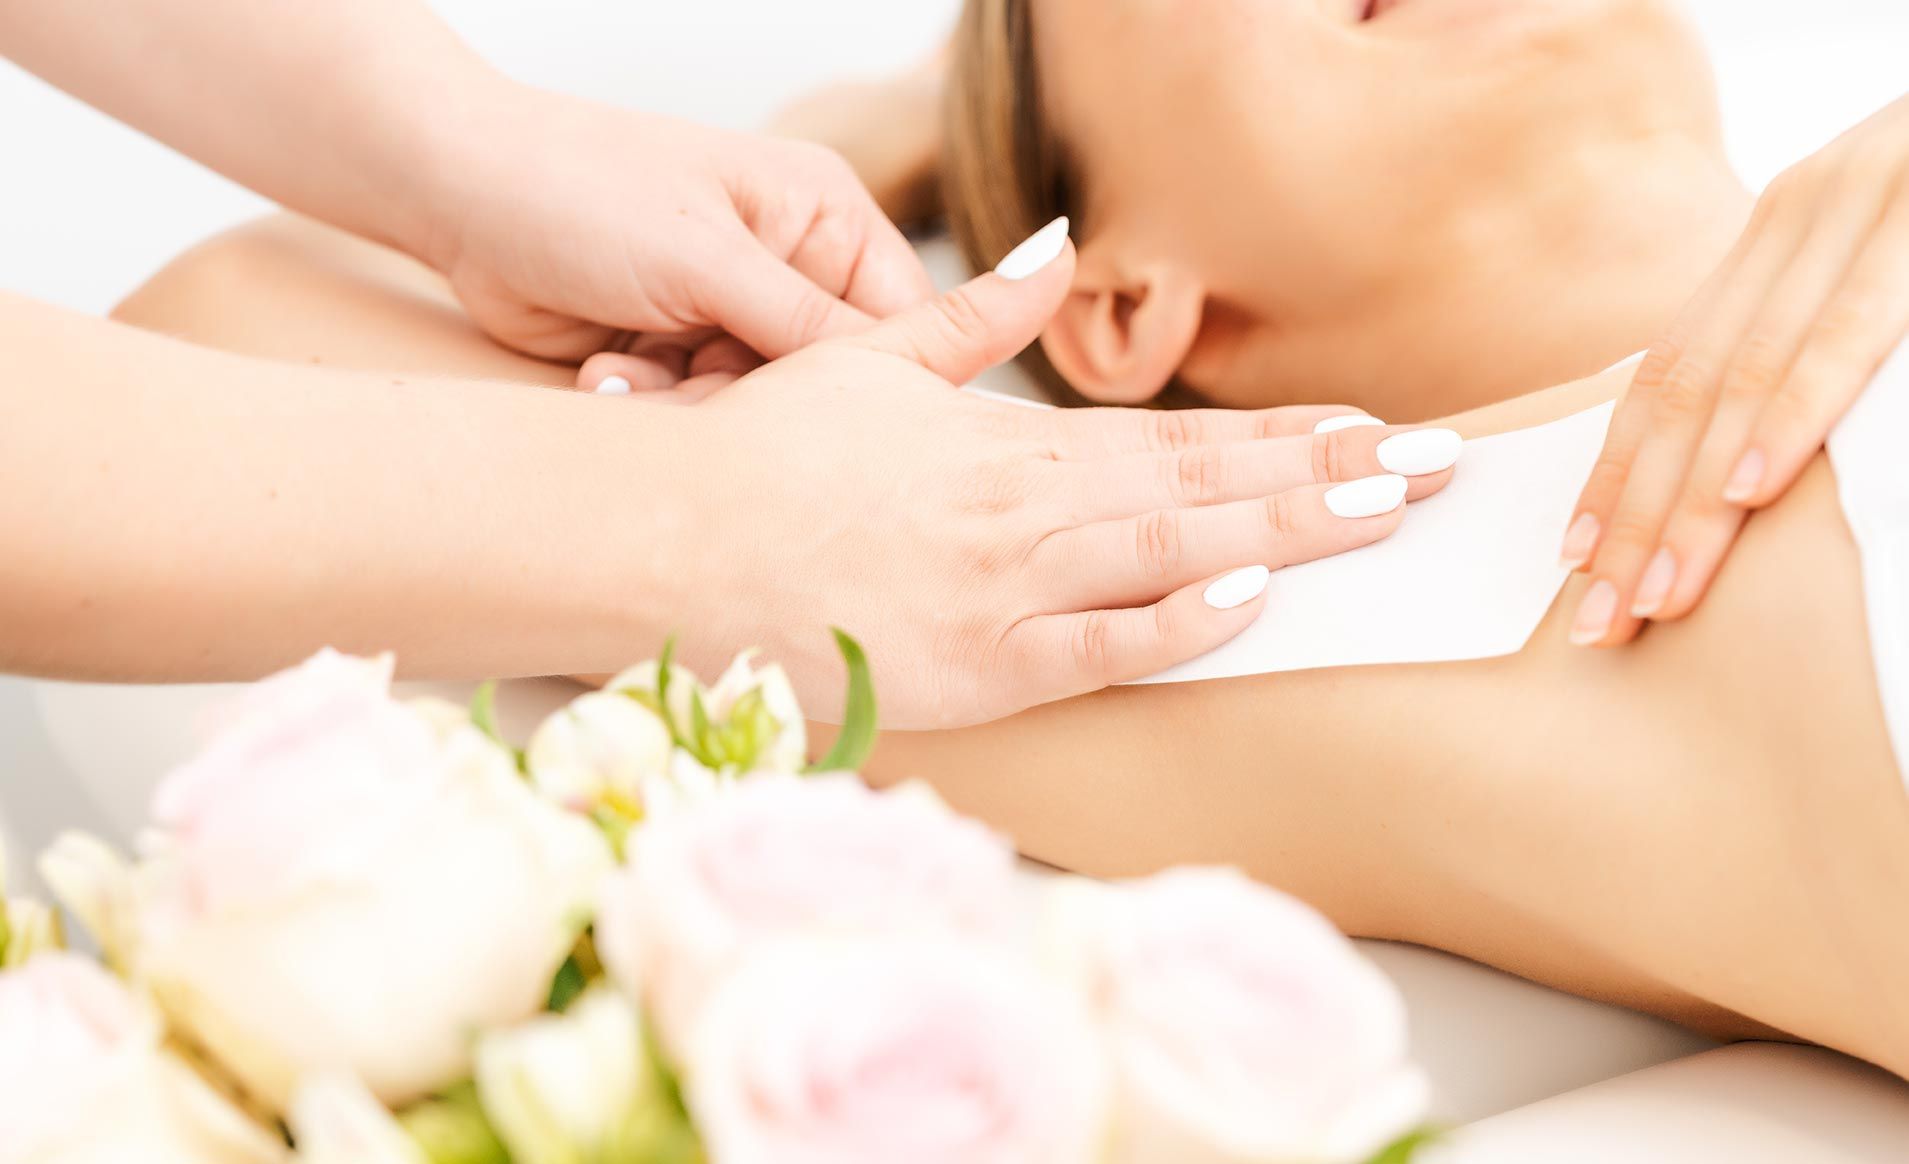 Aristocracy Salon & Day Spa offers hair removal services in downtown Plymouth, MA